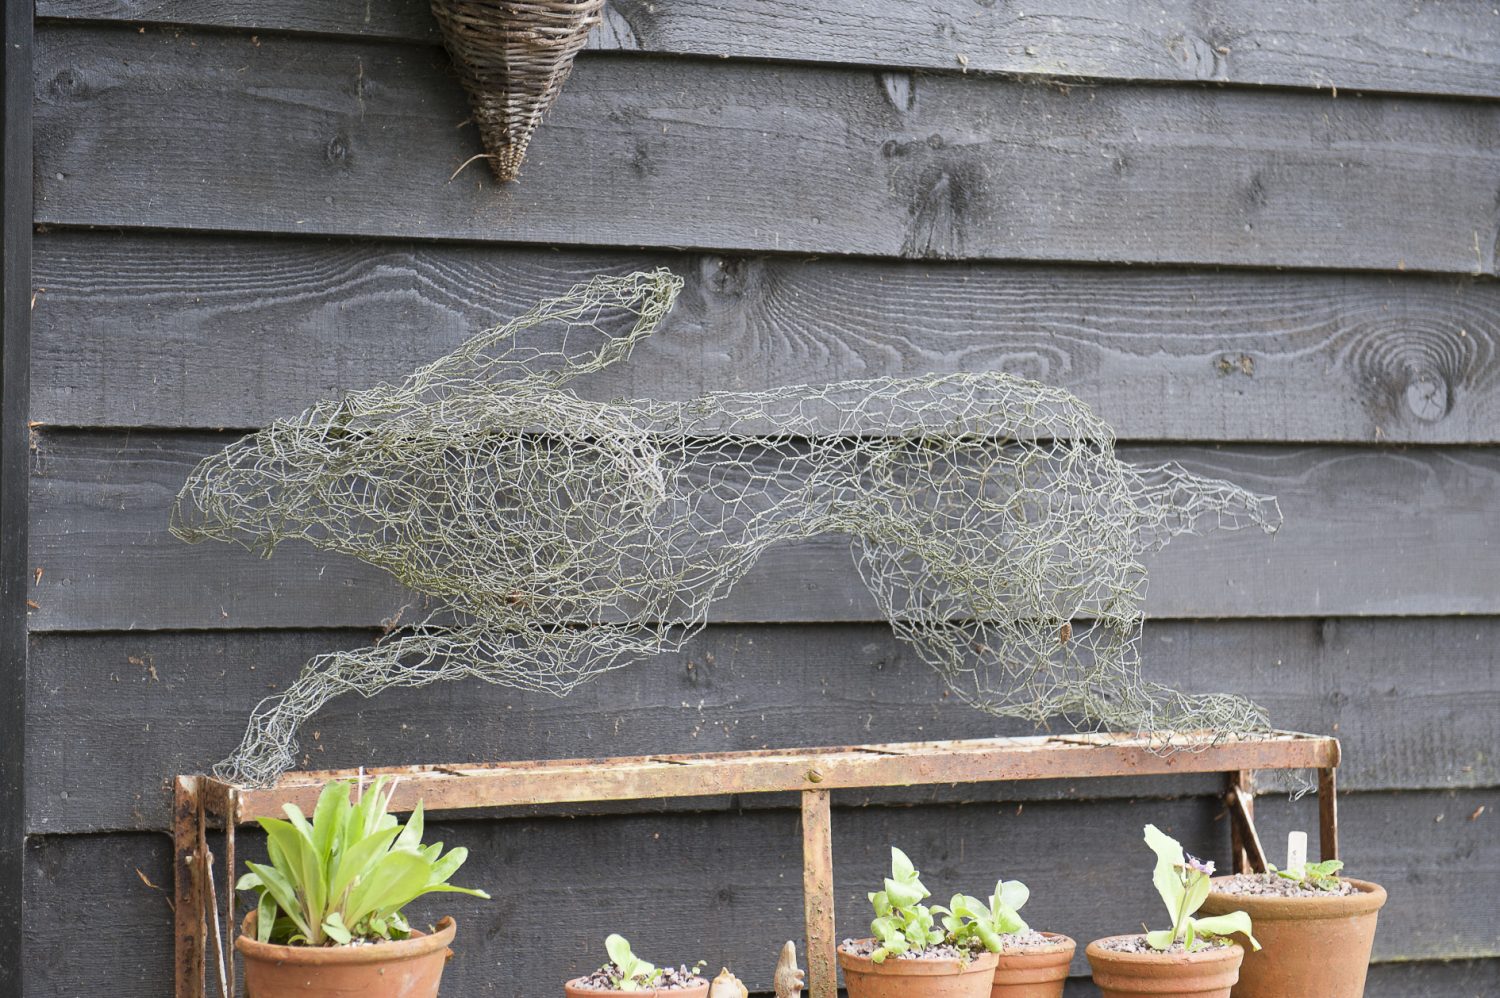 A chicken wire running hare was made for Wendy by artist Lucy Williams